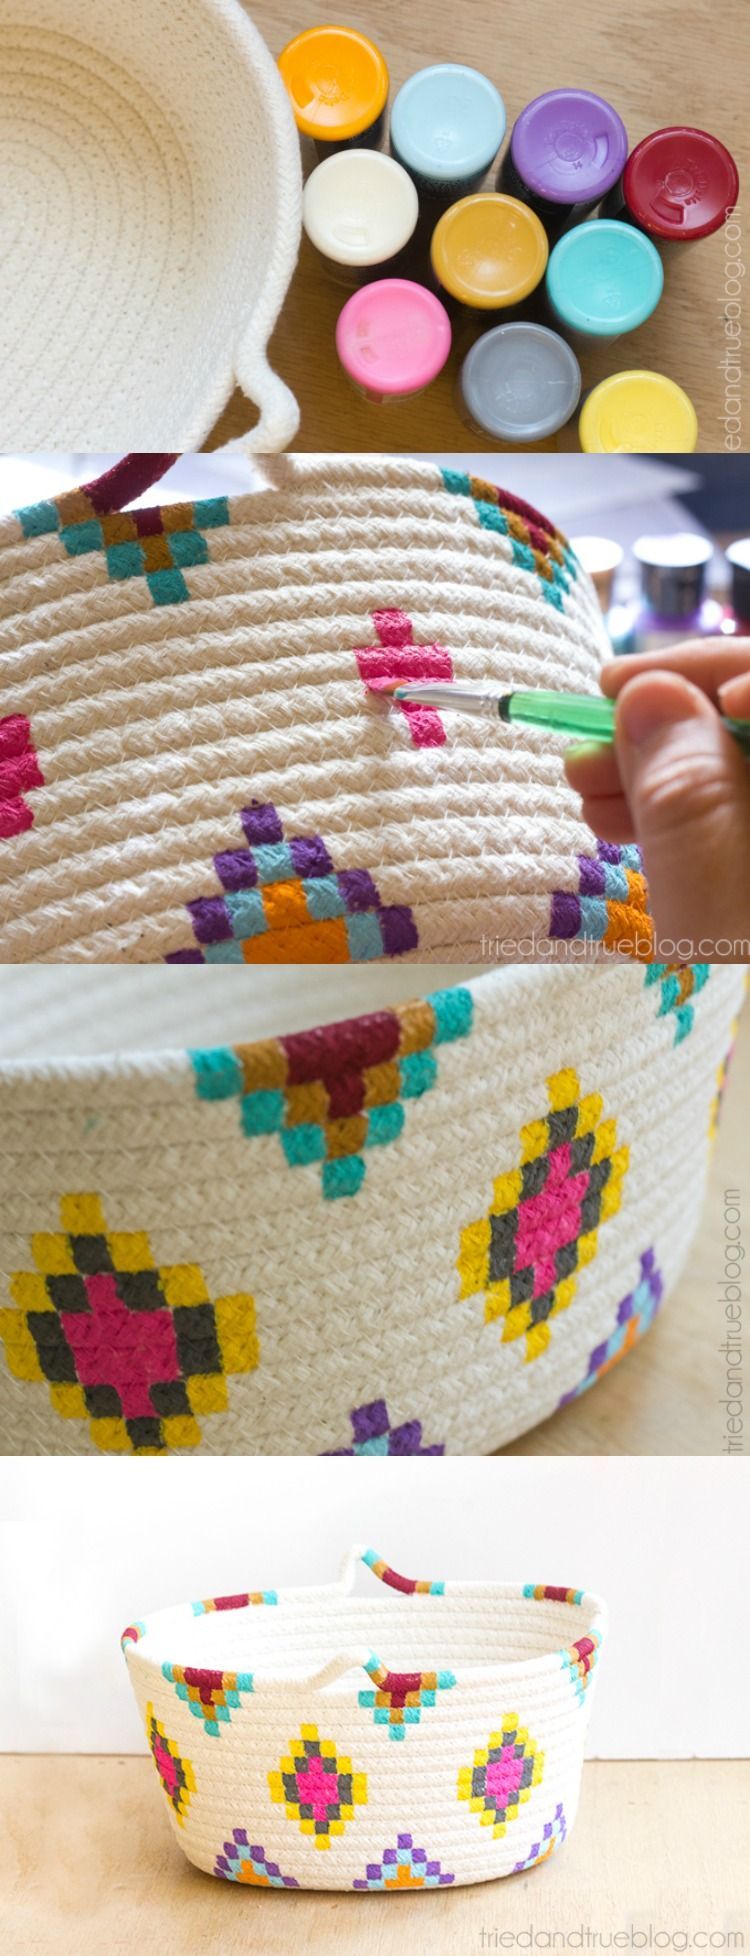 Pretty! This Kilim-Inspired painted basket tutorial is an easy way to try out a fun new color palette quickly and inexpensively.